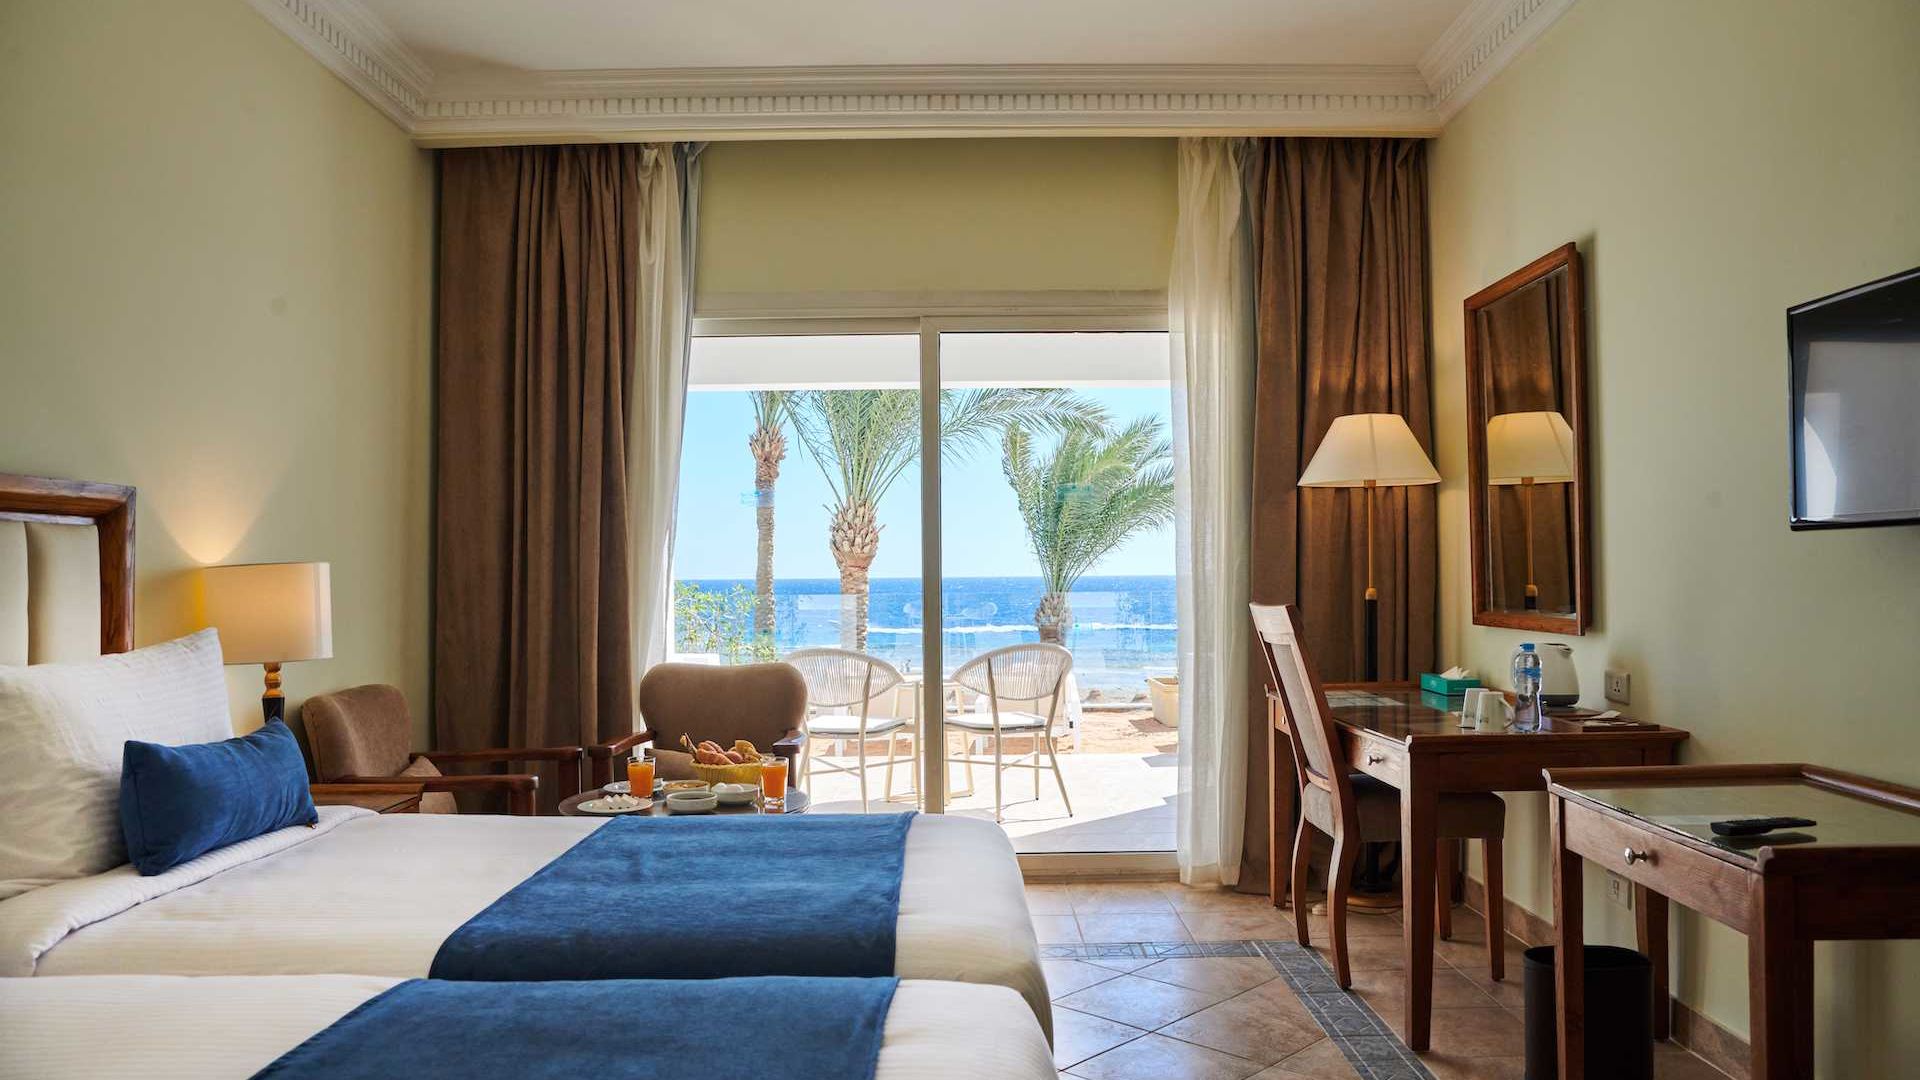 A Hotel Room With A View Of The Ocean